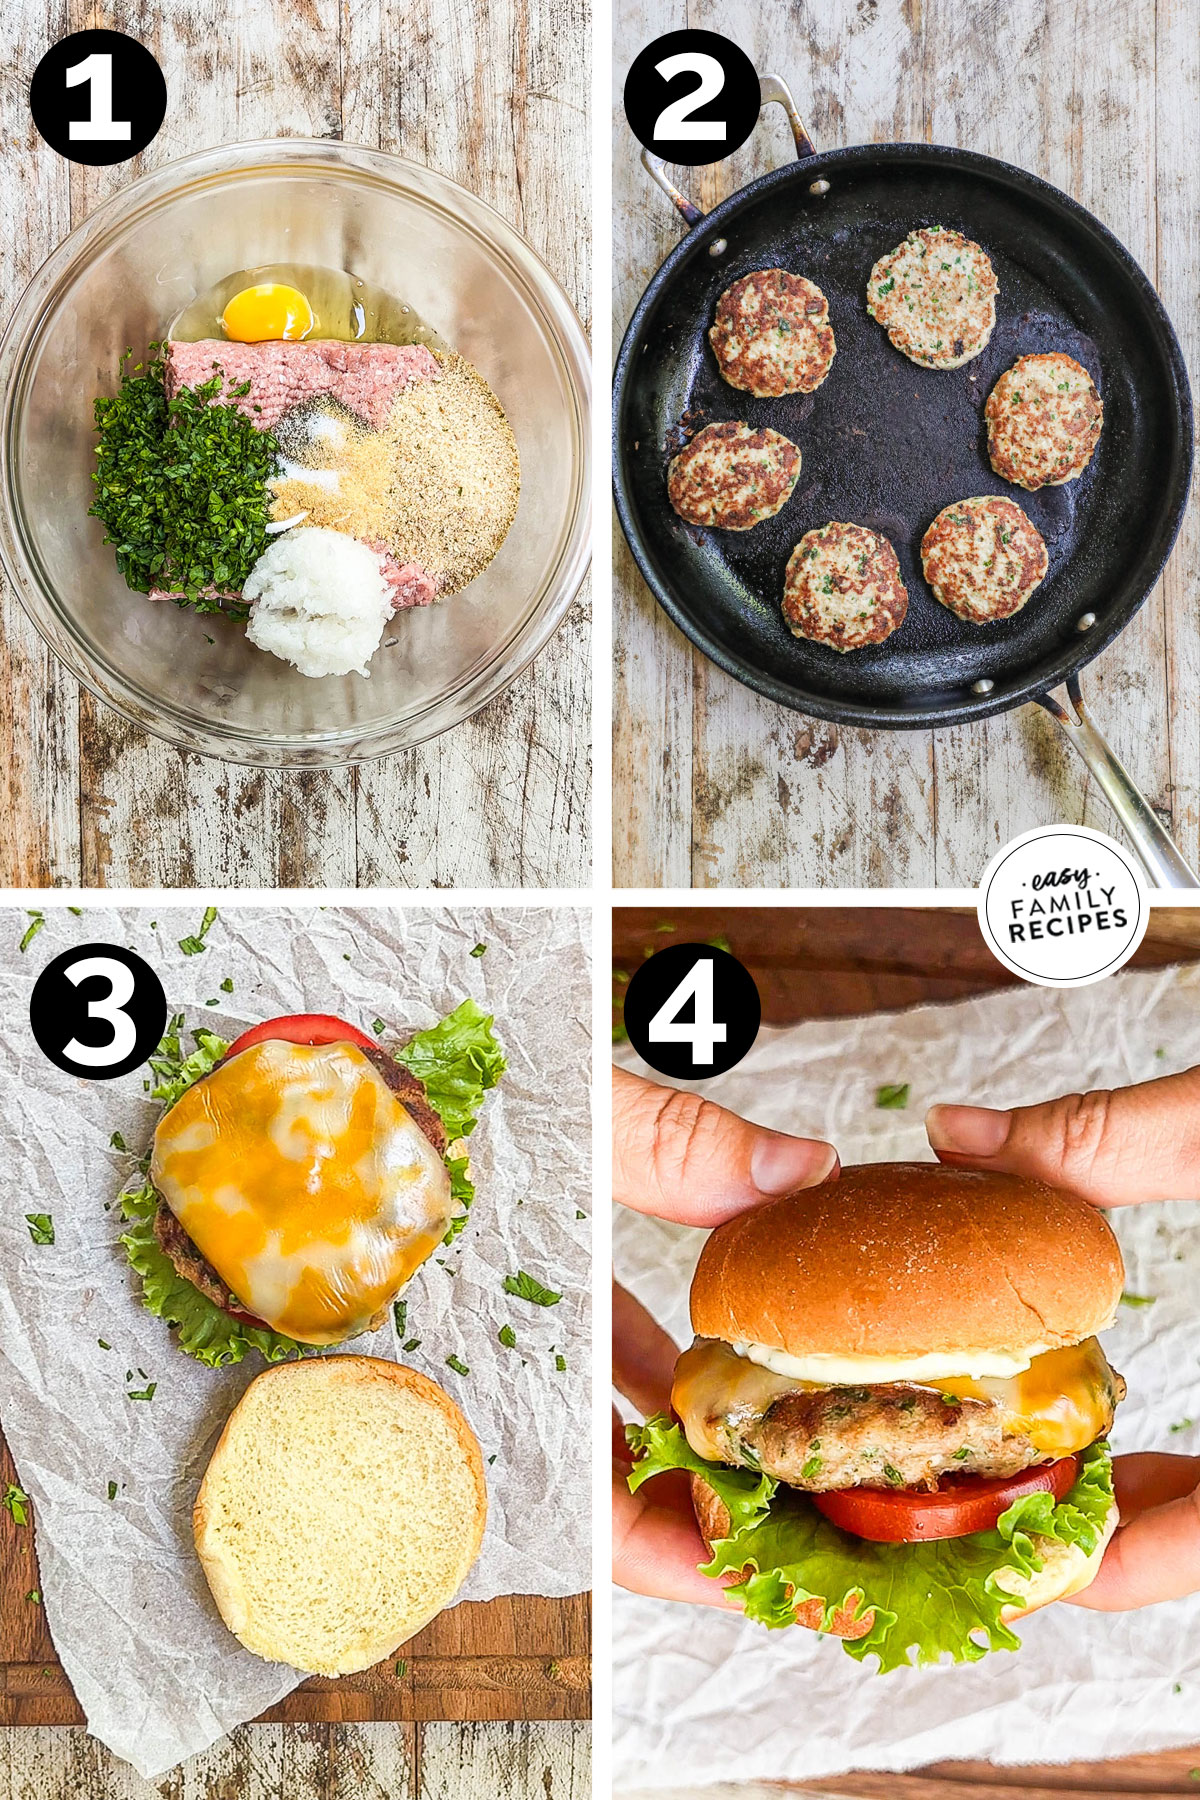 how to make turkey burger sliders 1)mix the ground turkey with breadcrumbs and seasonings 2)pan sear the patties 3)assemble on mini burger buns 4)serve.